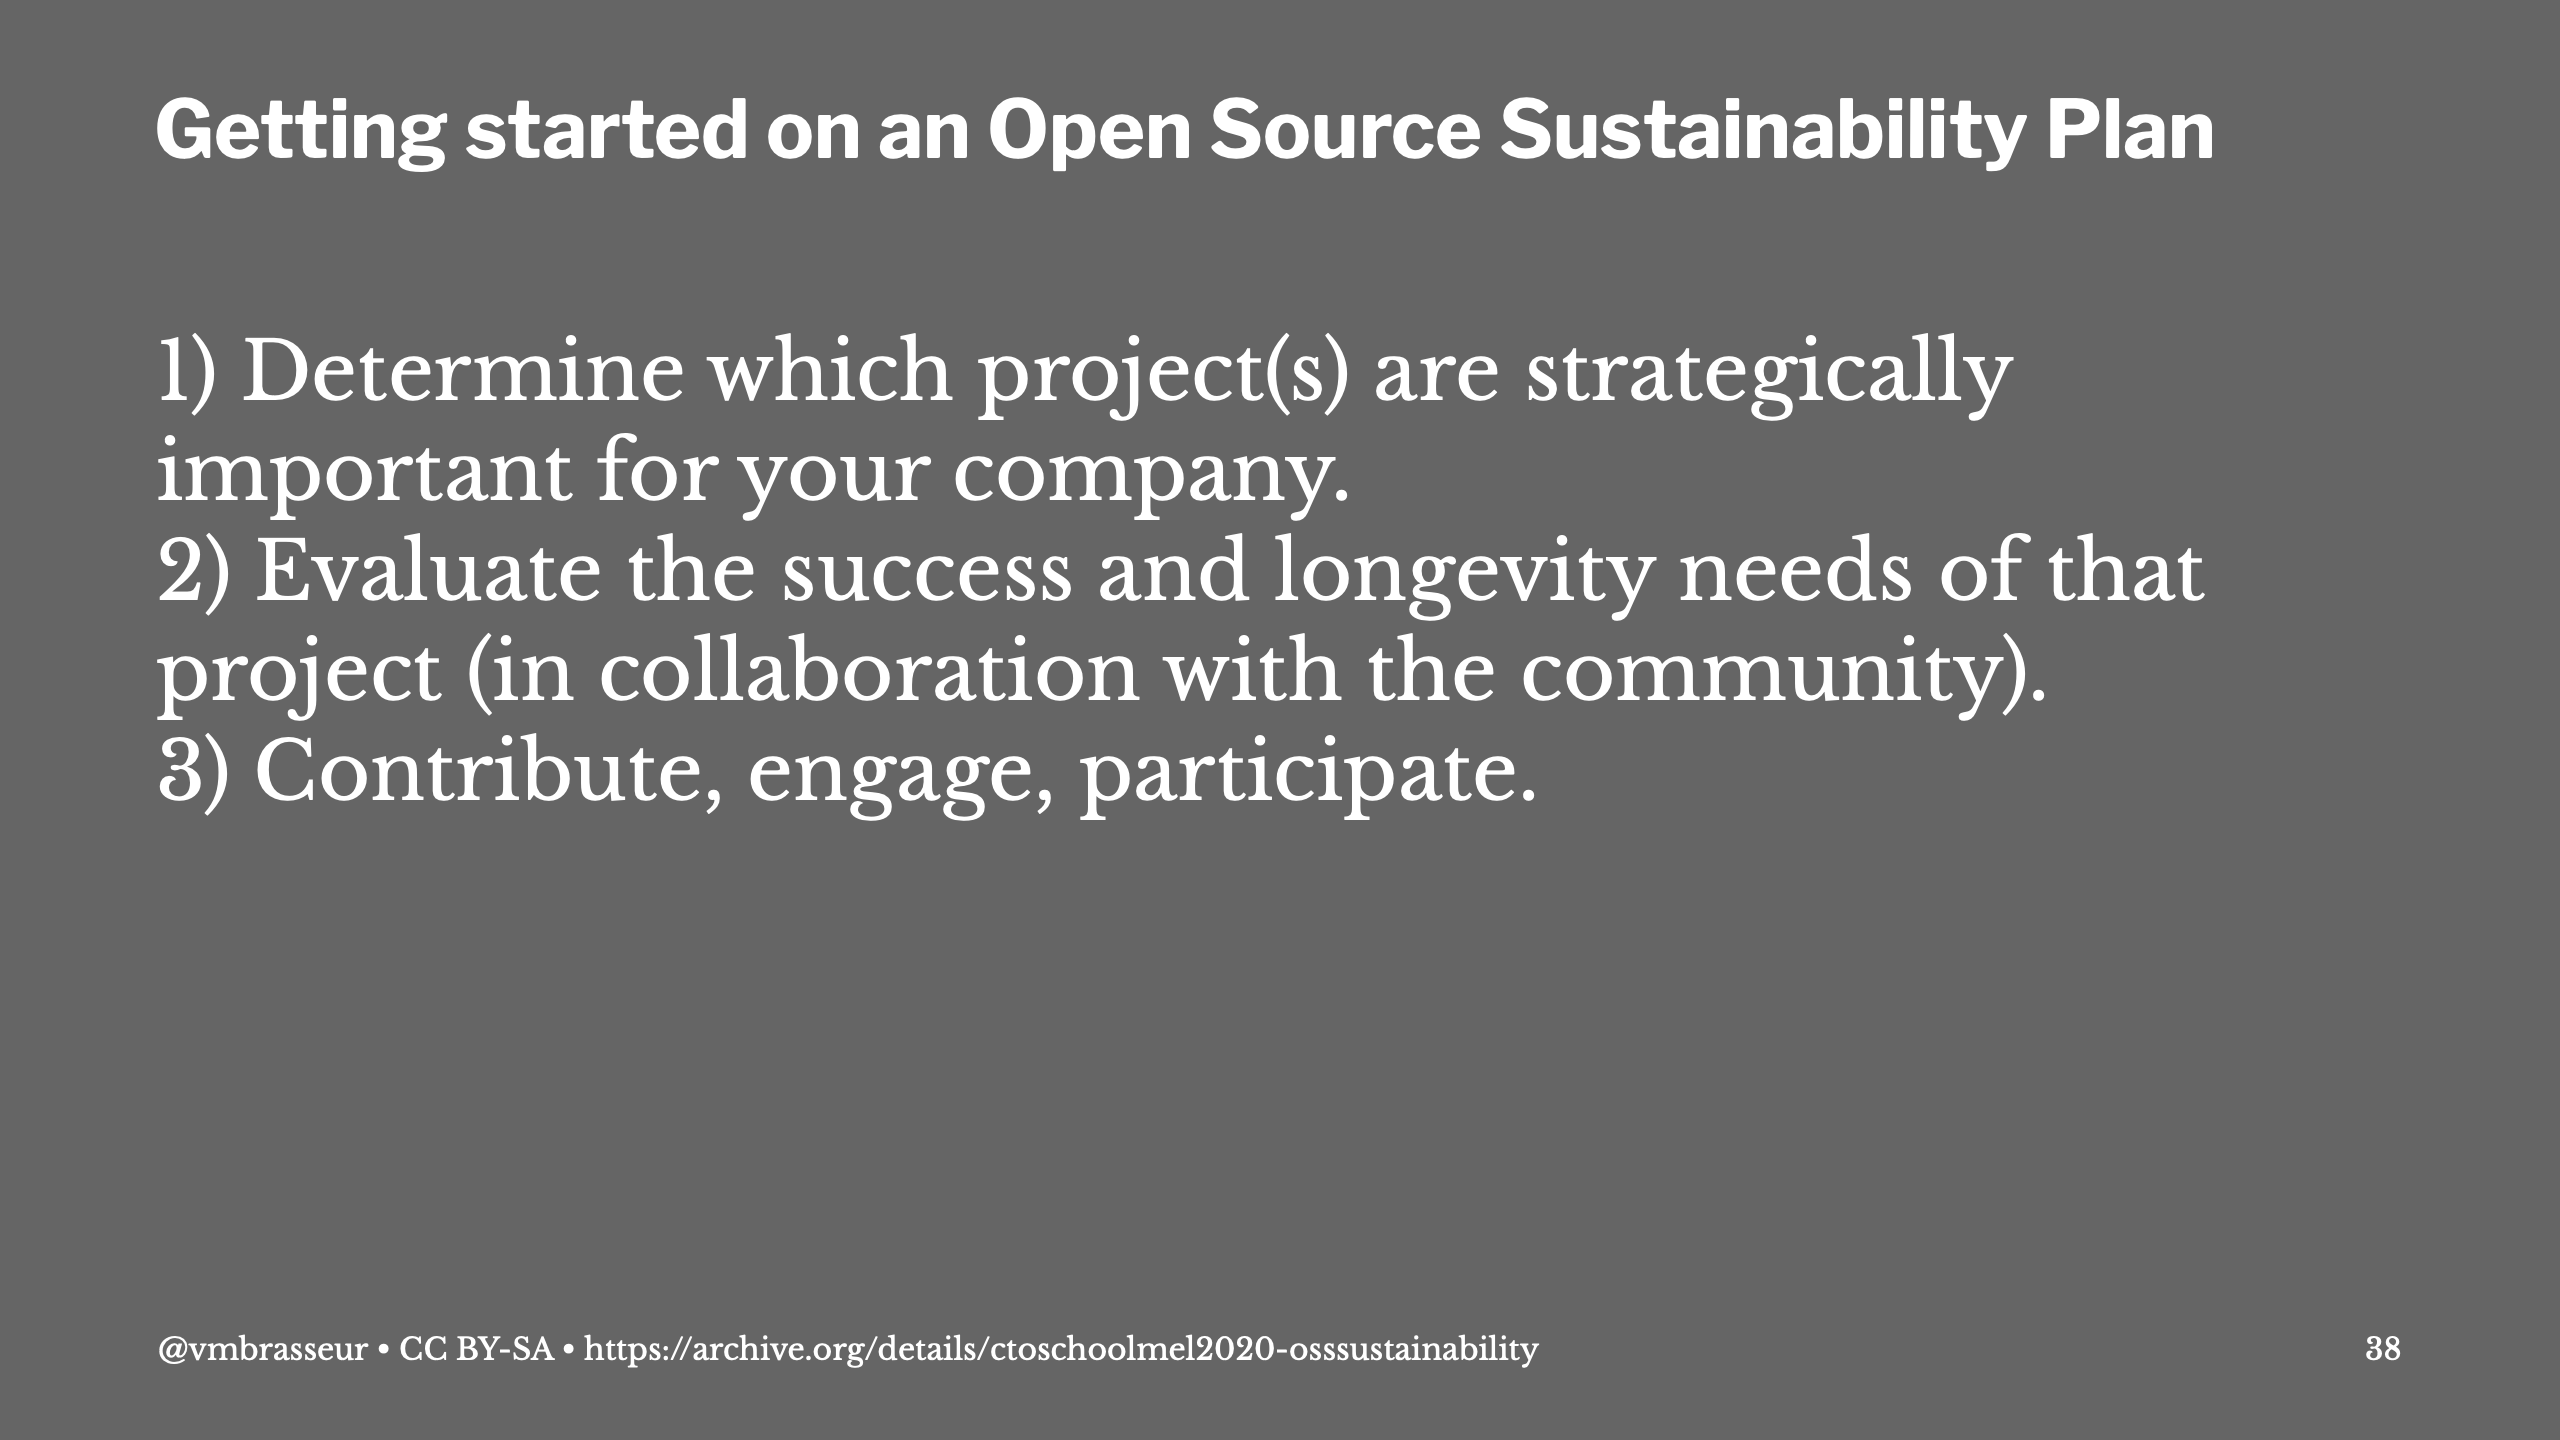 Getting started on an Open Source Sustainability Plan: Determine which project(s) are strategically important for your company; Evaluate the success and longevity needs of that project (in collaboration with the community); Contribute, engage, participate.